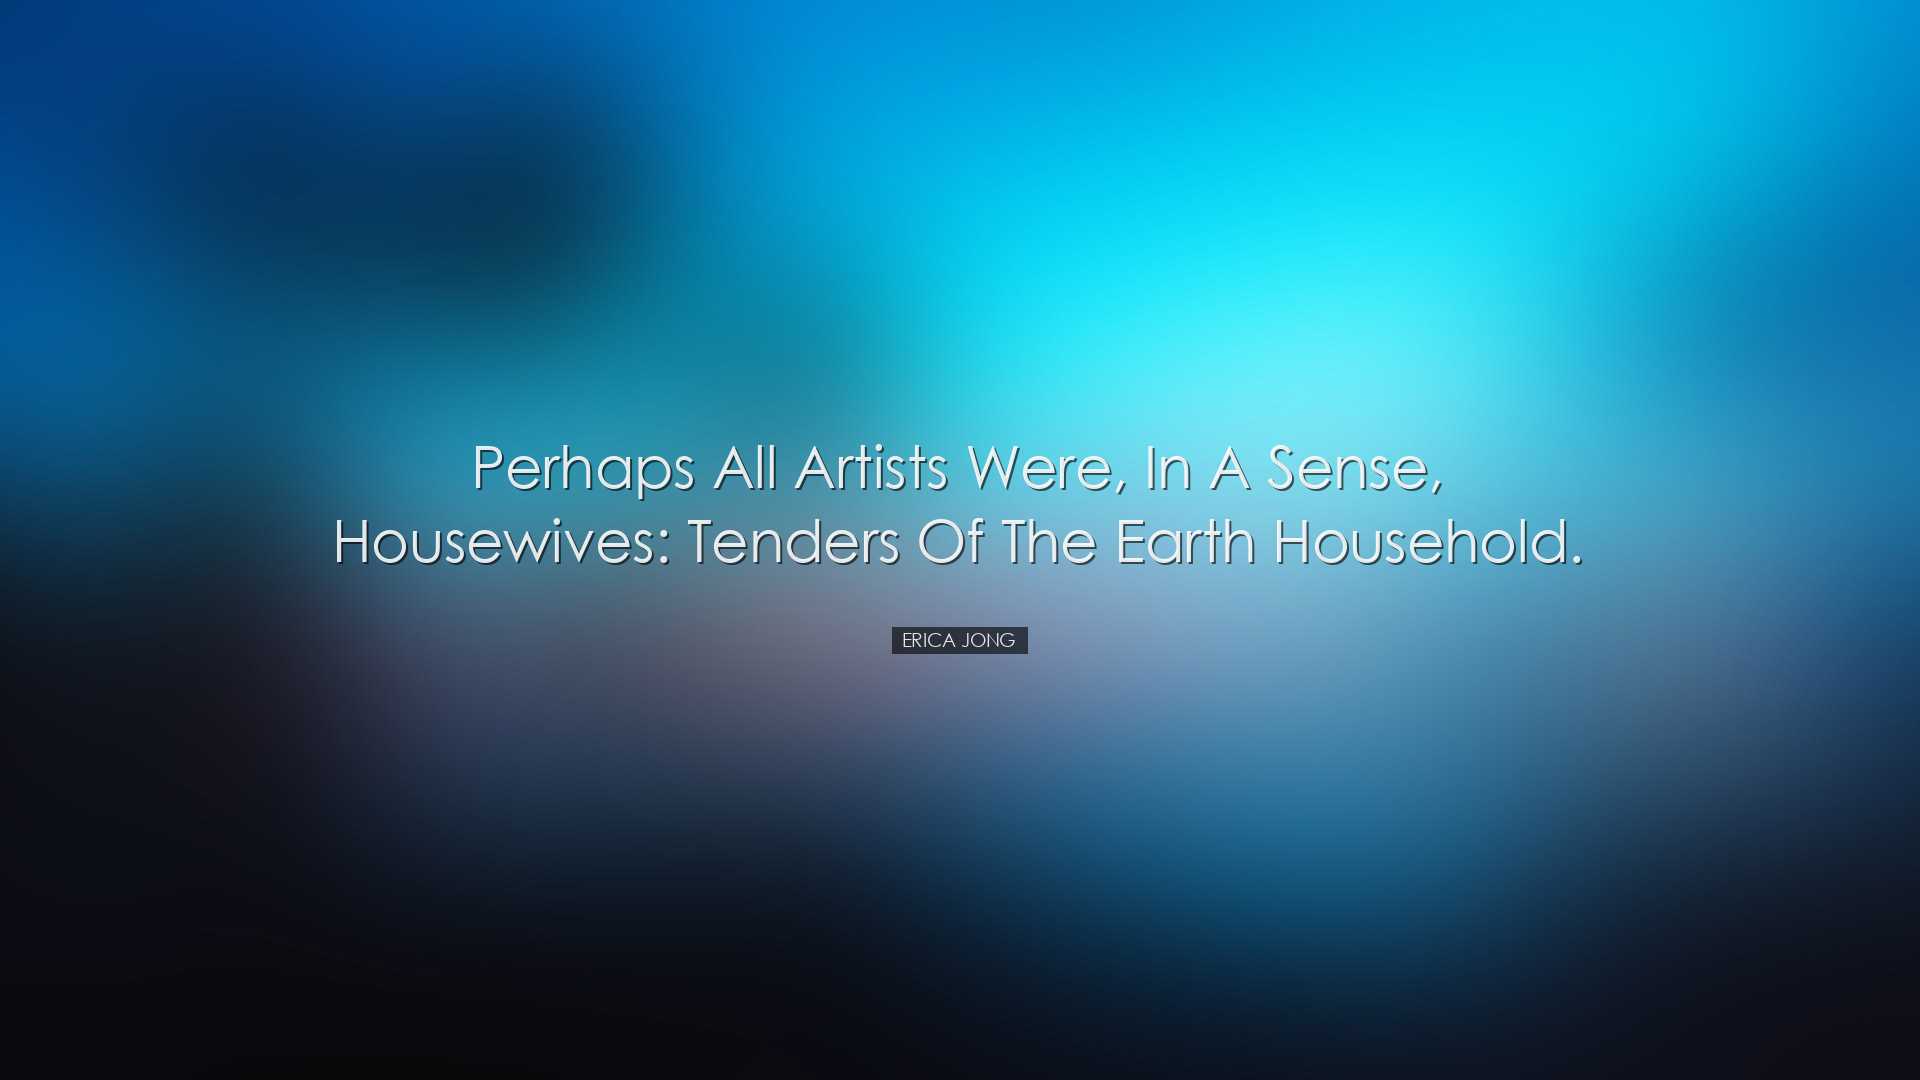 Perhaps all artists were, in a sense, housewives: tenders of the e